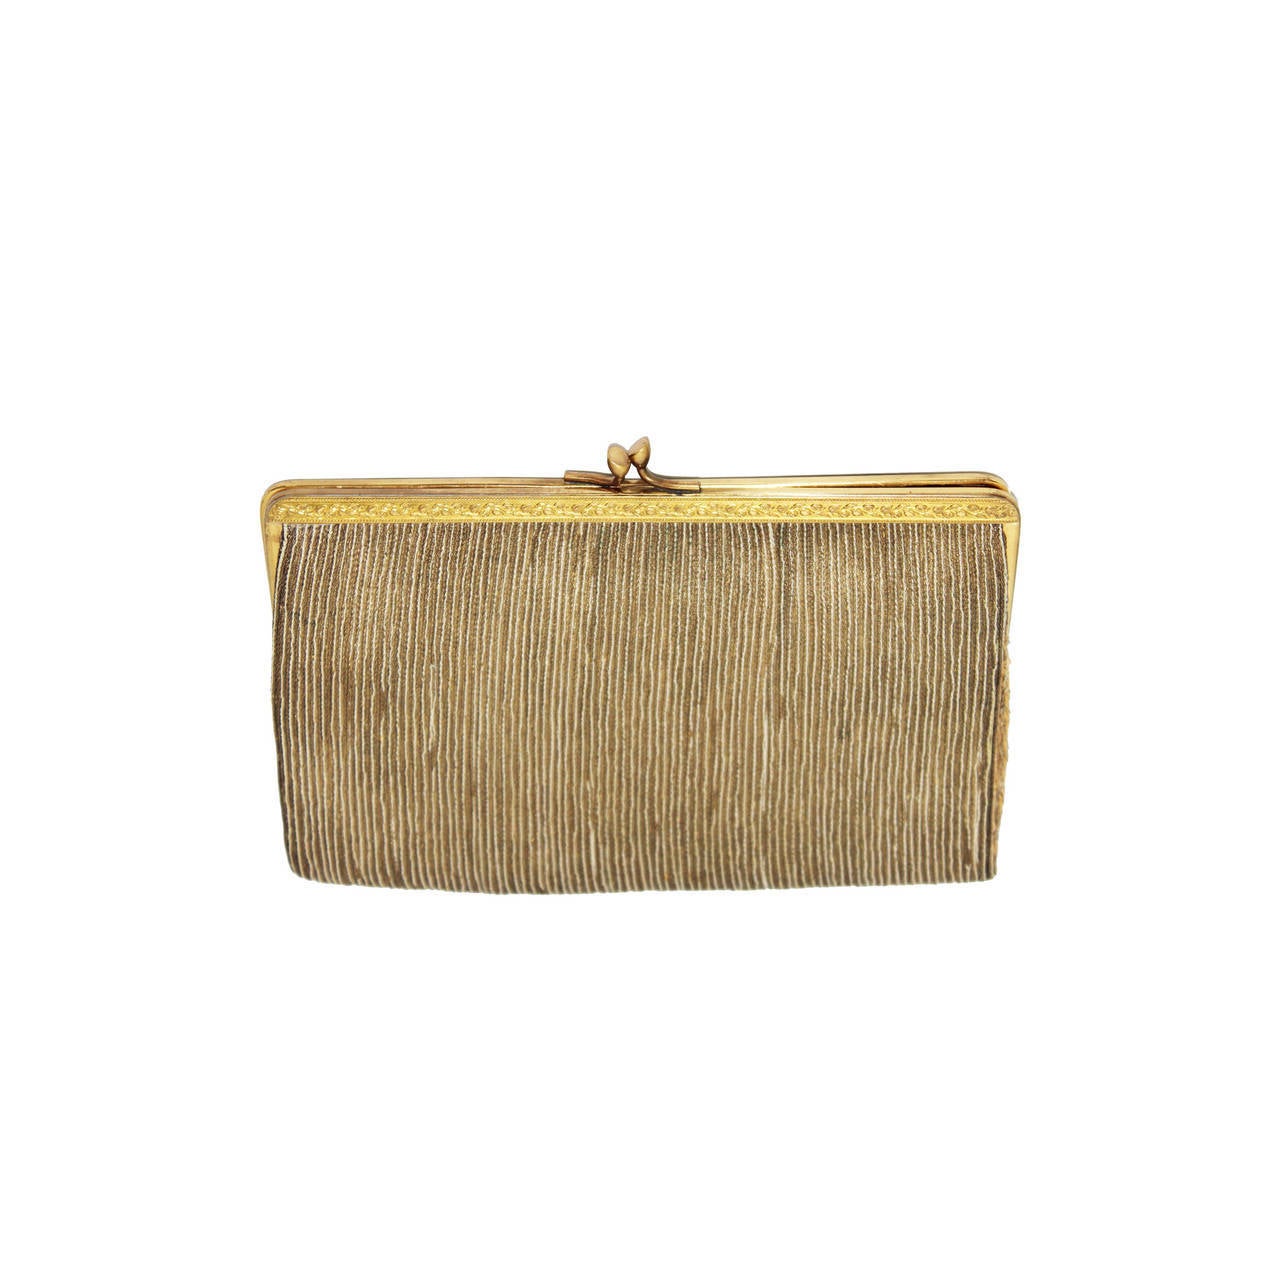 Exceptional Delvaux Glamour Clutch 1960 at 1stdibs